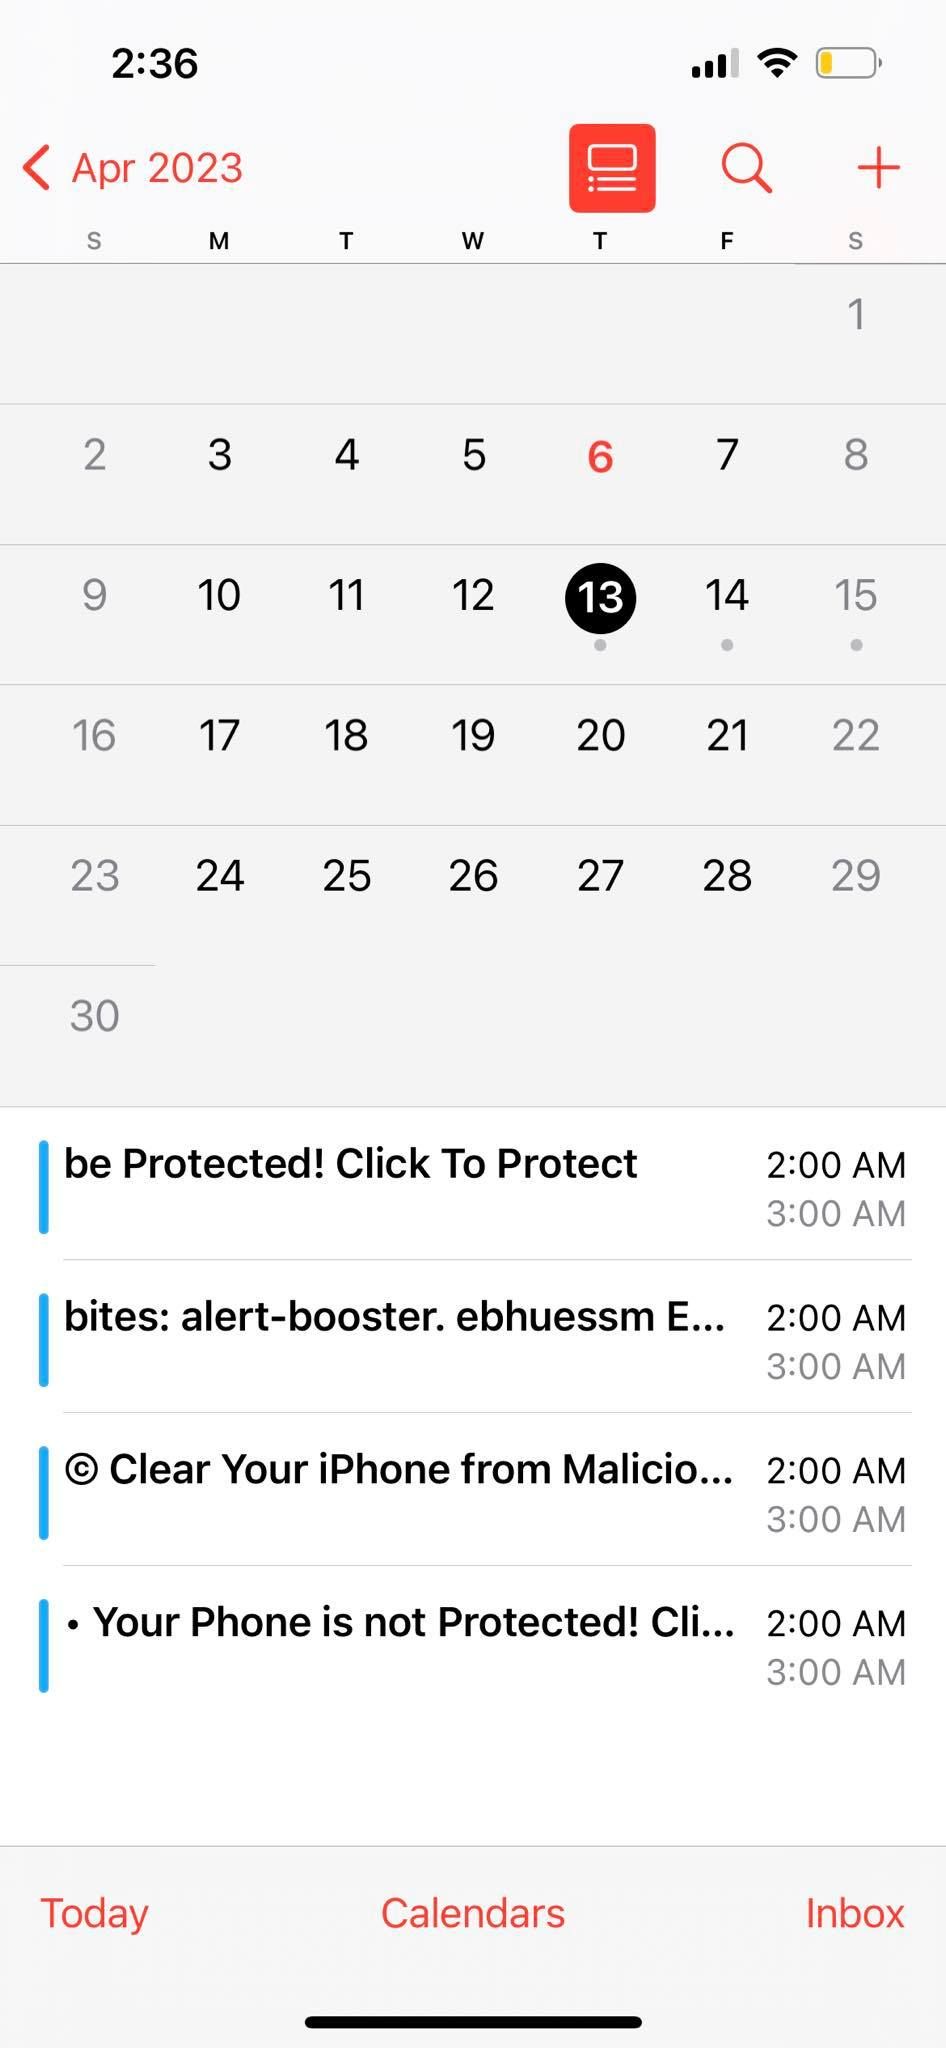 What Are Calendar Viruses and How Do You Combat Them?